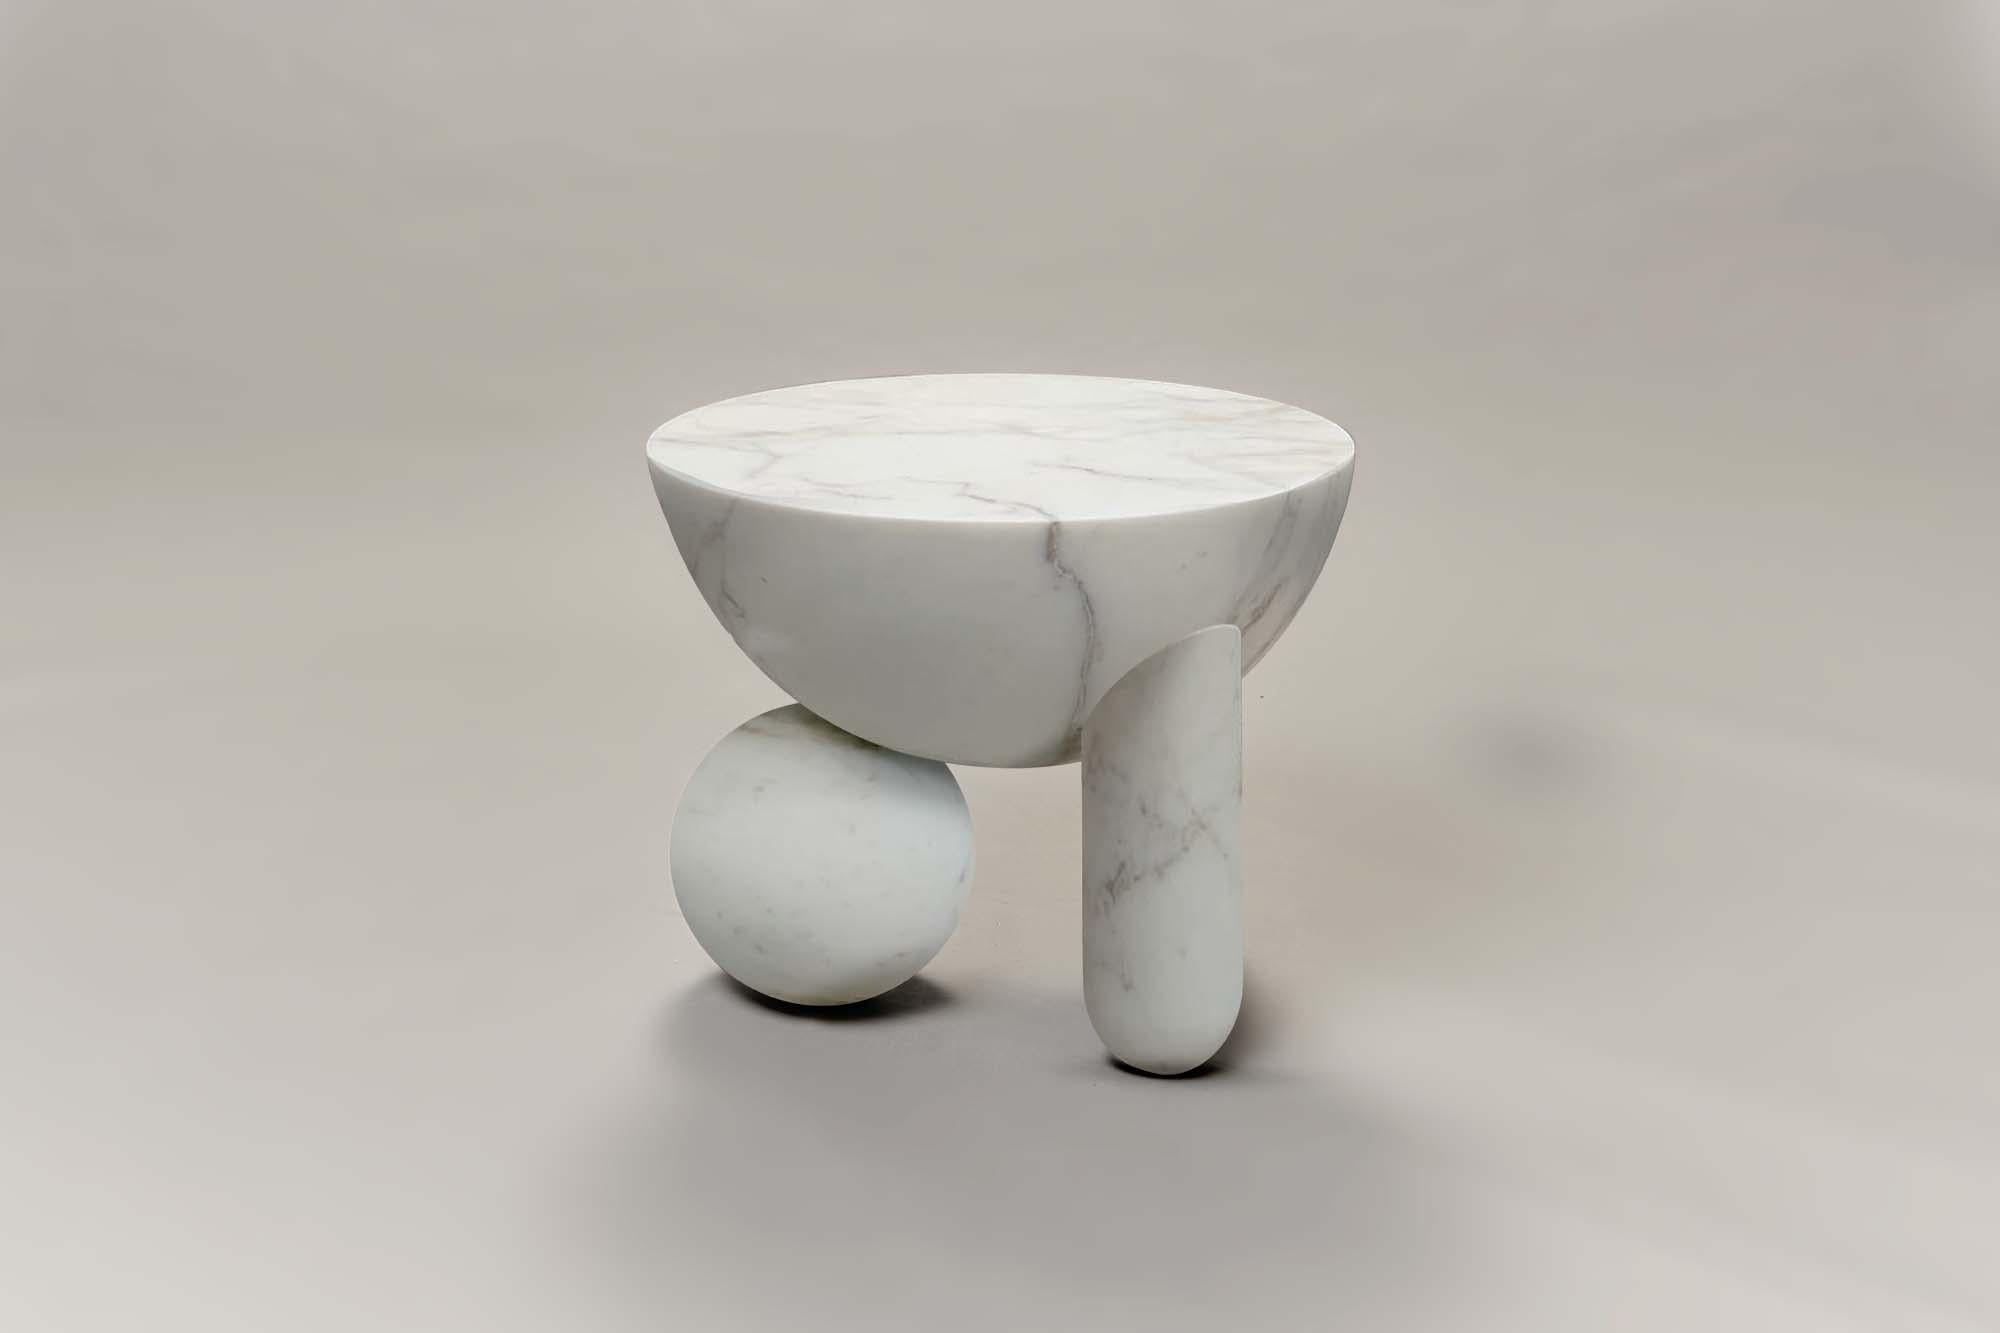 Profiterole small coffee table is 3D milled from calacatta oro marble, supported by round dessert-like spheres and semi-cupped legs which support a rounded top. The coffee table also comes in white carrara marble and black nero marquina, in either